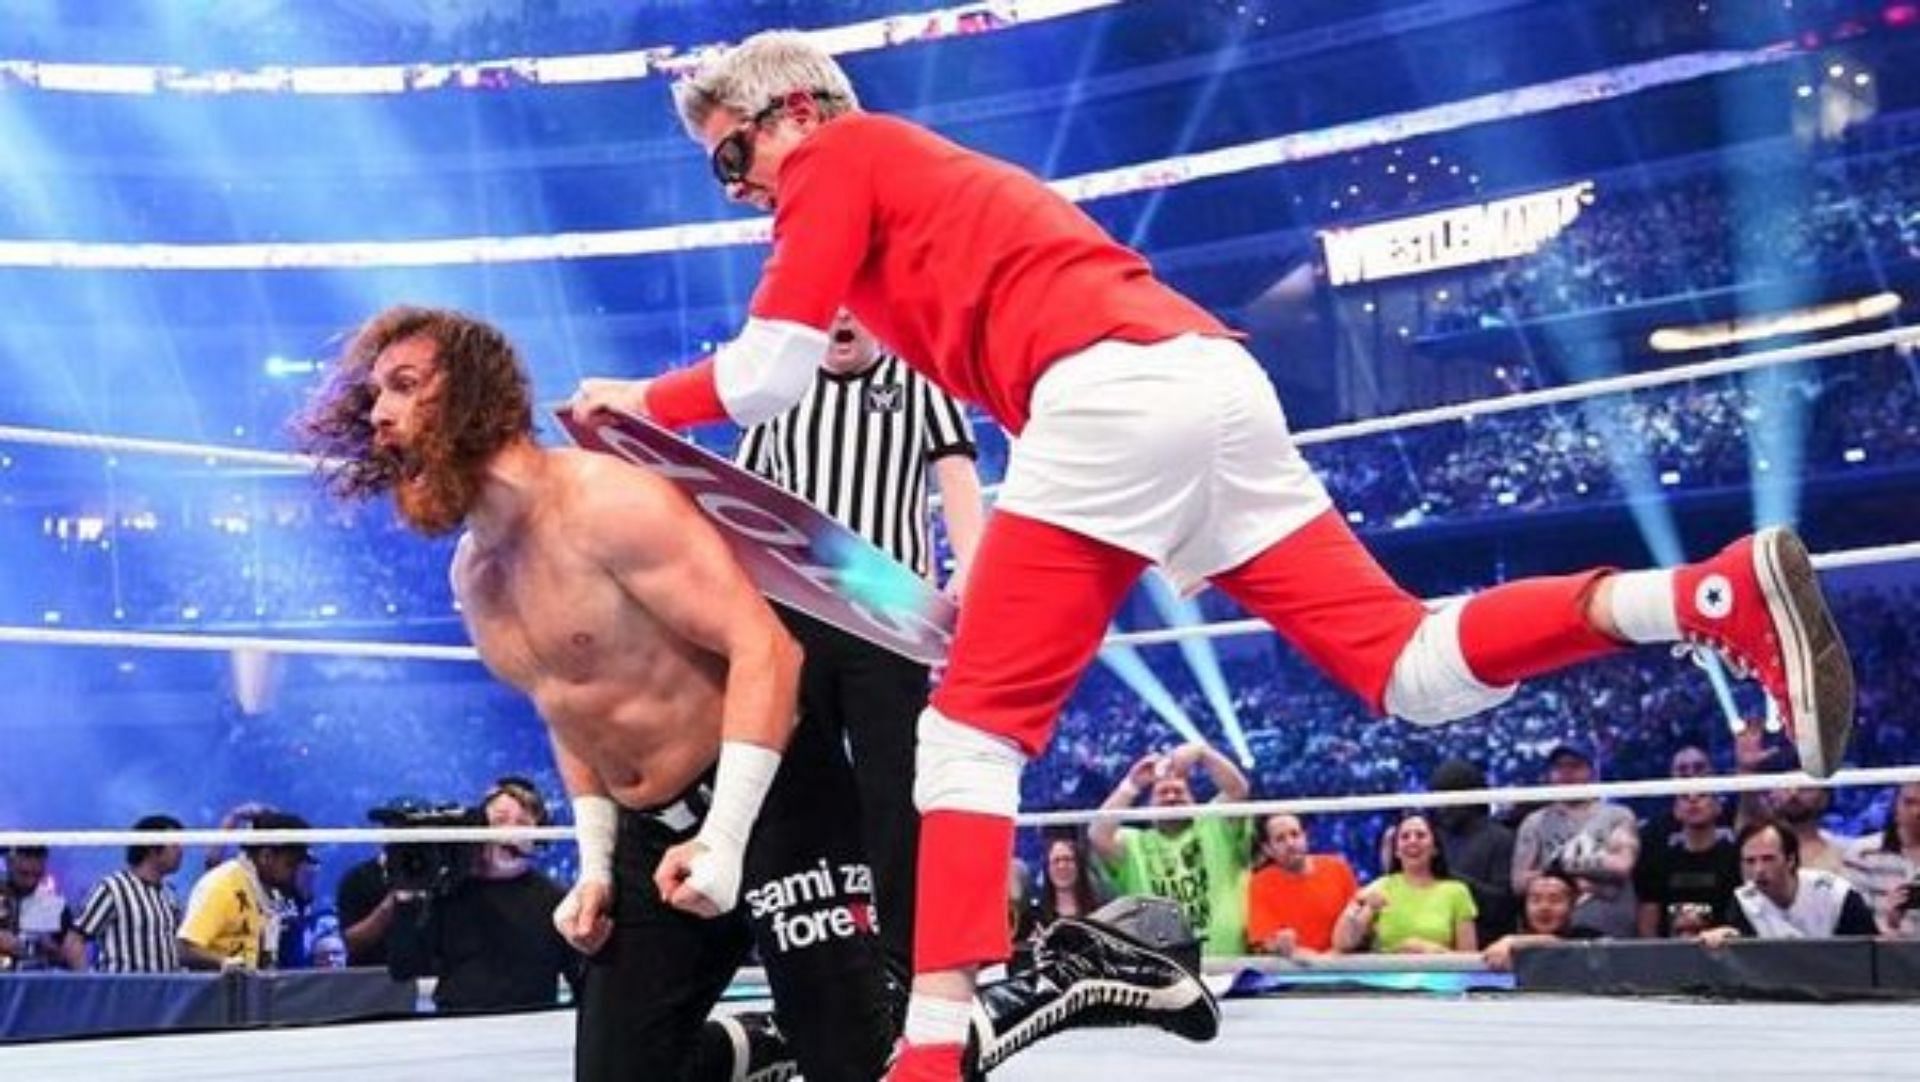 Sami Zayn and Johnny Knoxville had one of the standout matches at WrestleMania 38.